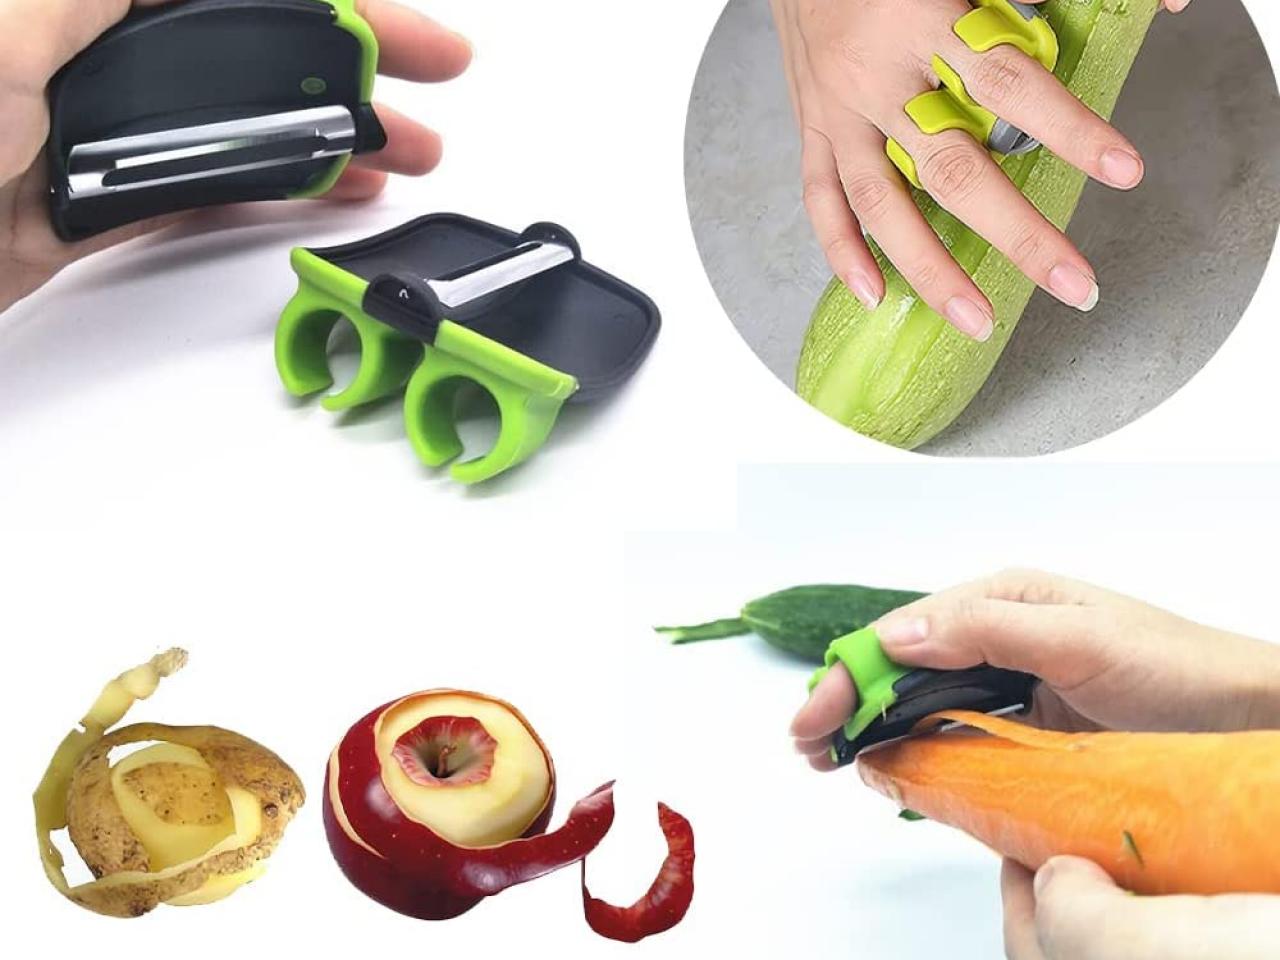 OXO Good Grips Vegetable Chopper with Easy Pour Opening (1 ct)